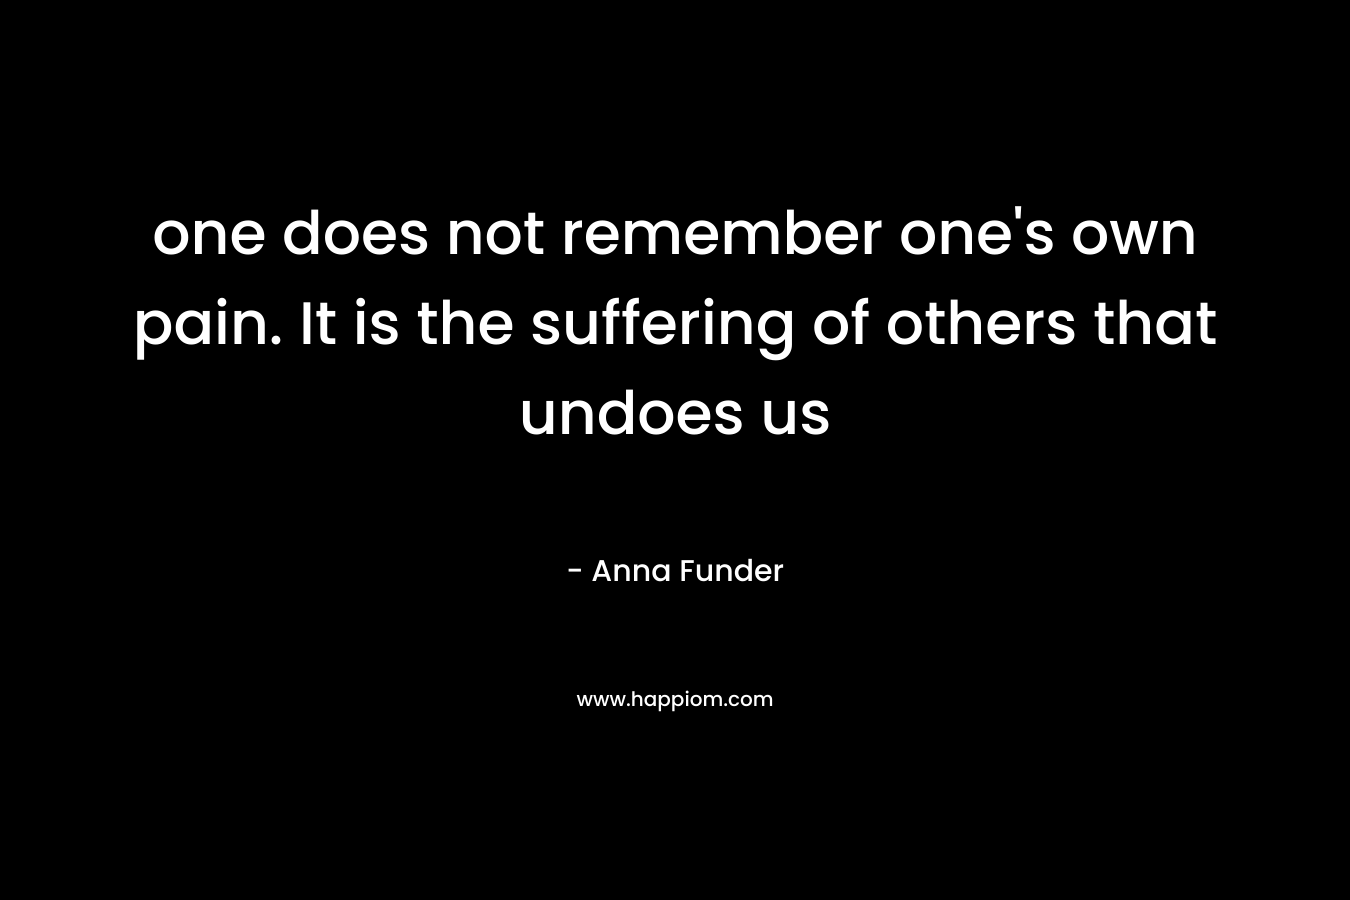 one does not remember one’s own pain. It is the suffering of others that undoes us – Anna Funder